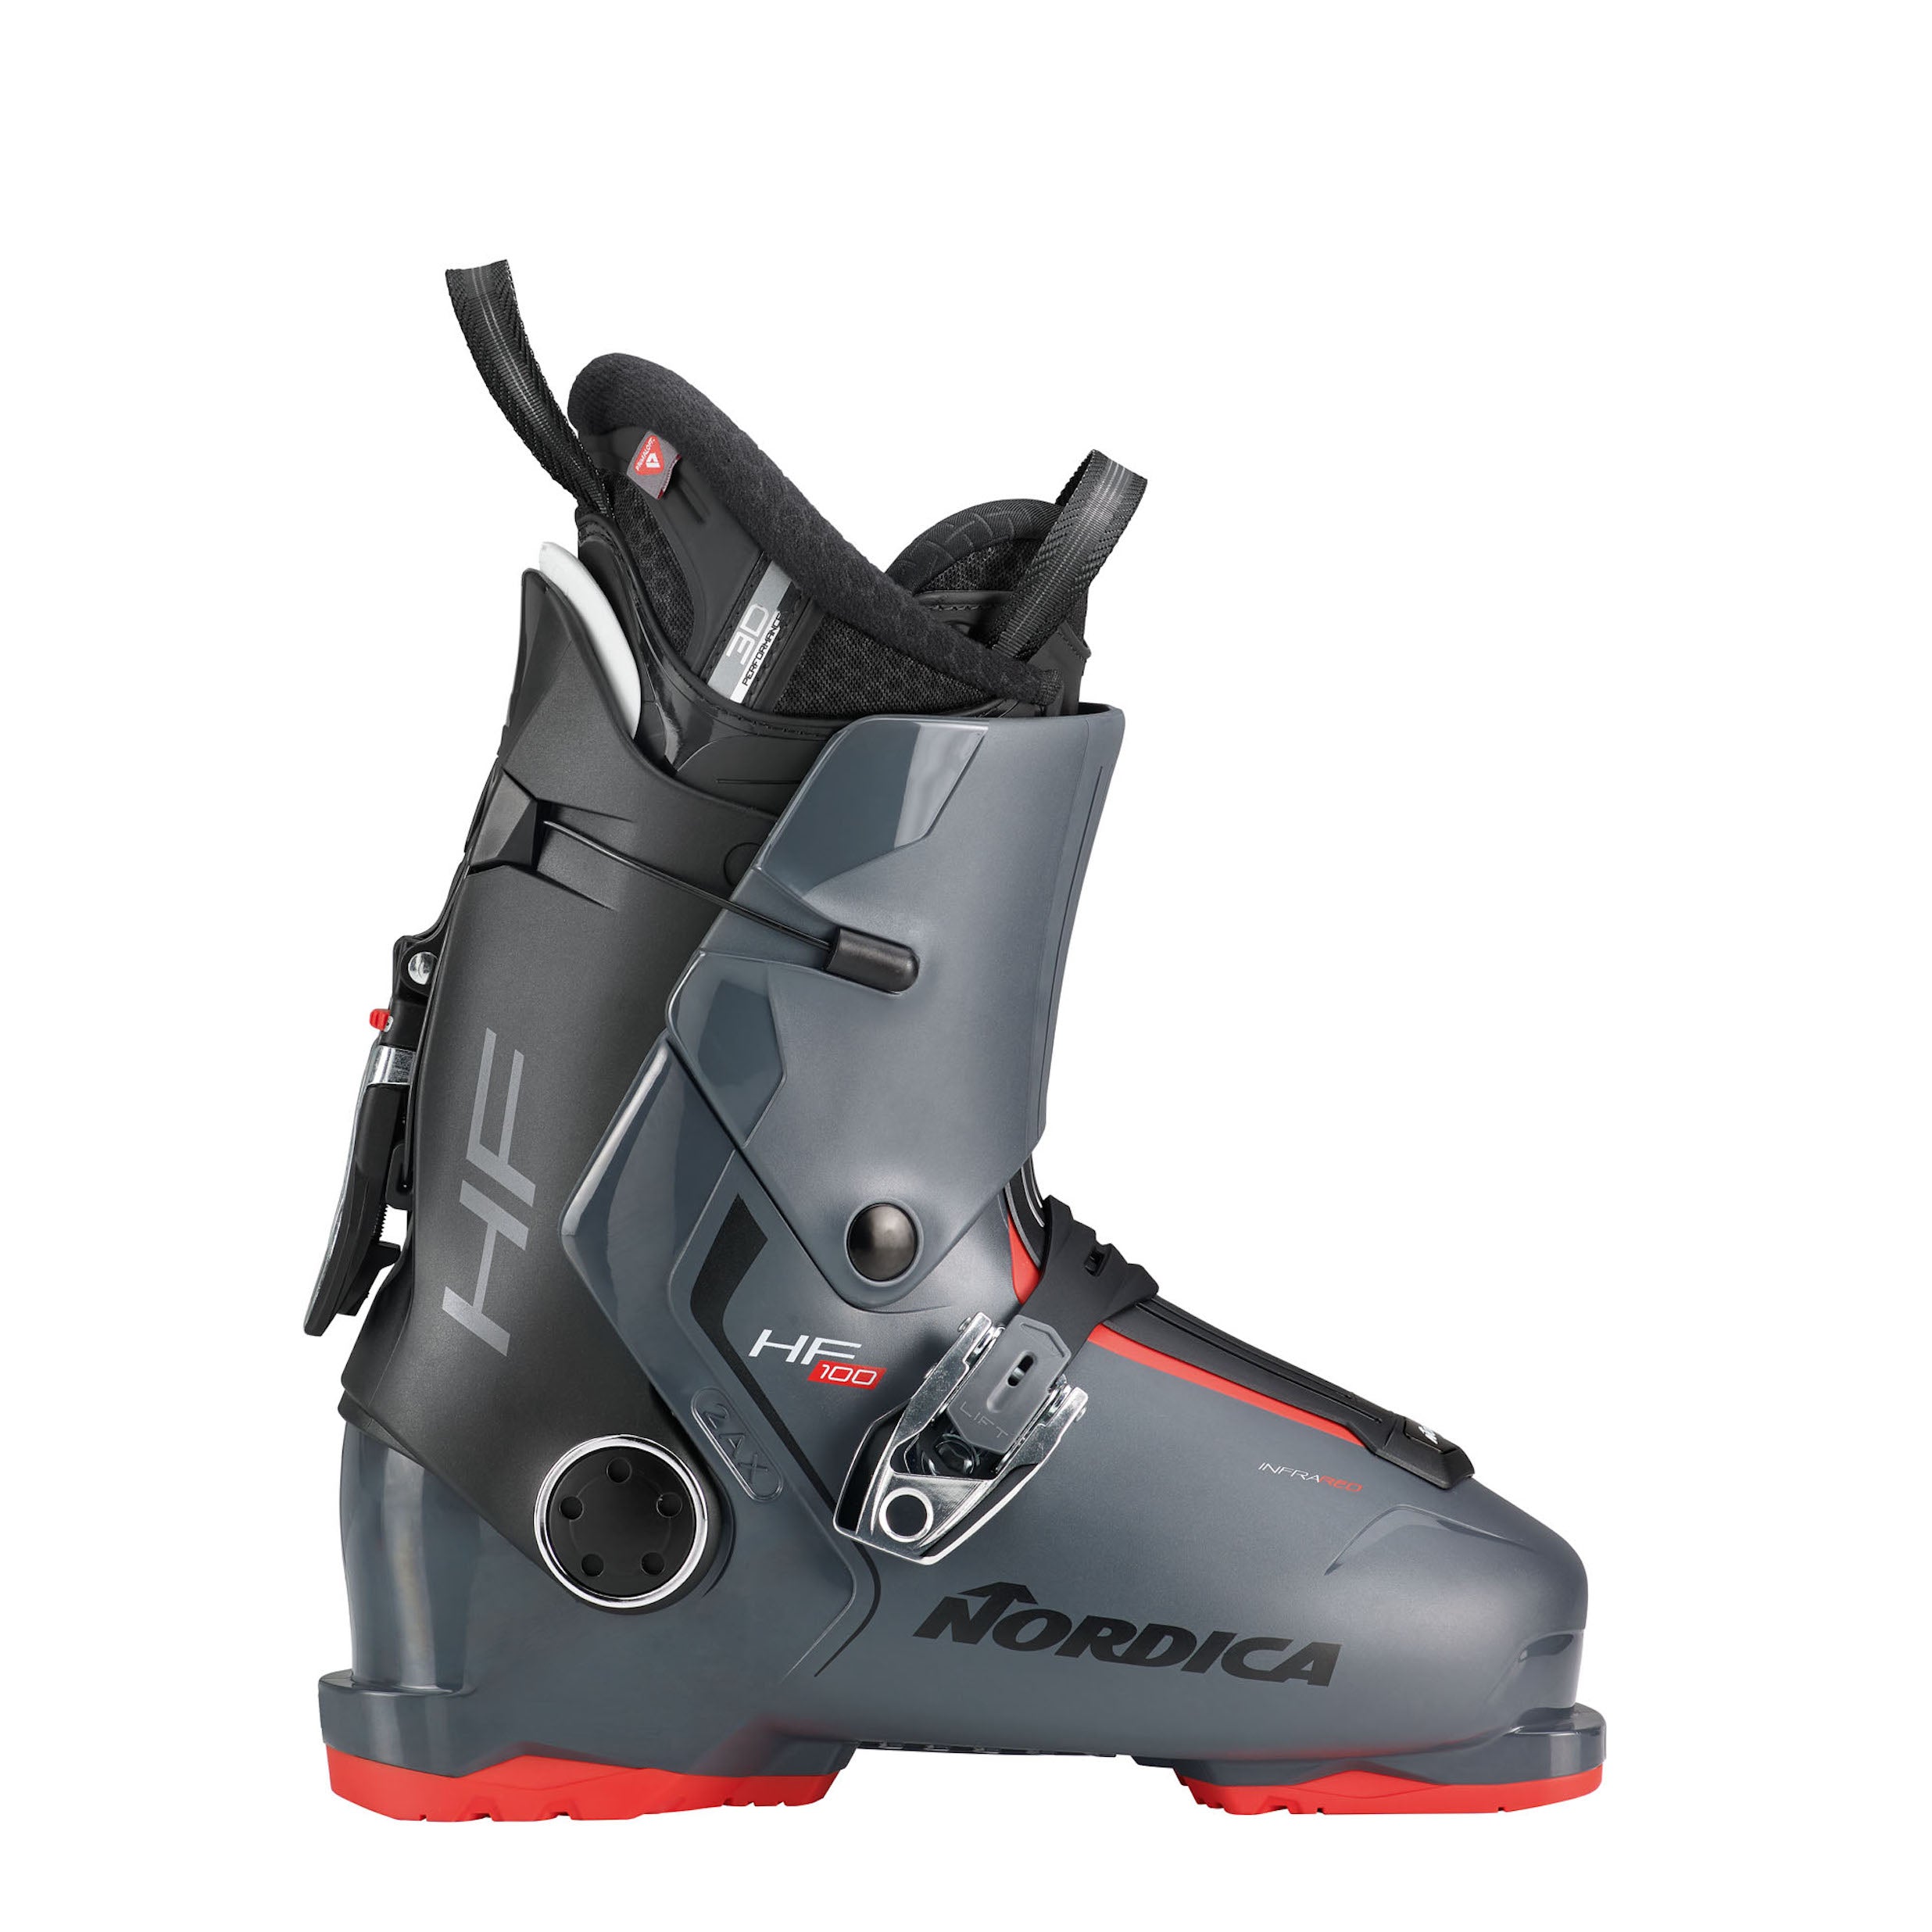 Men's Nordica HF 100 ski boot in grey and black with red accents. 2 buckles.